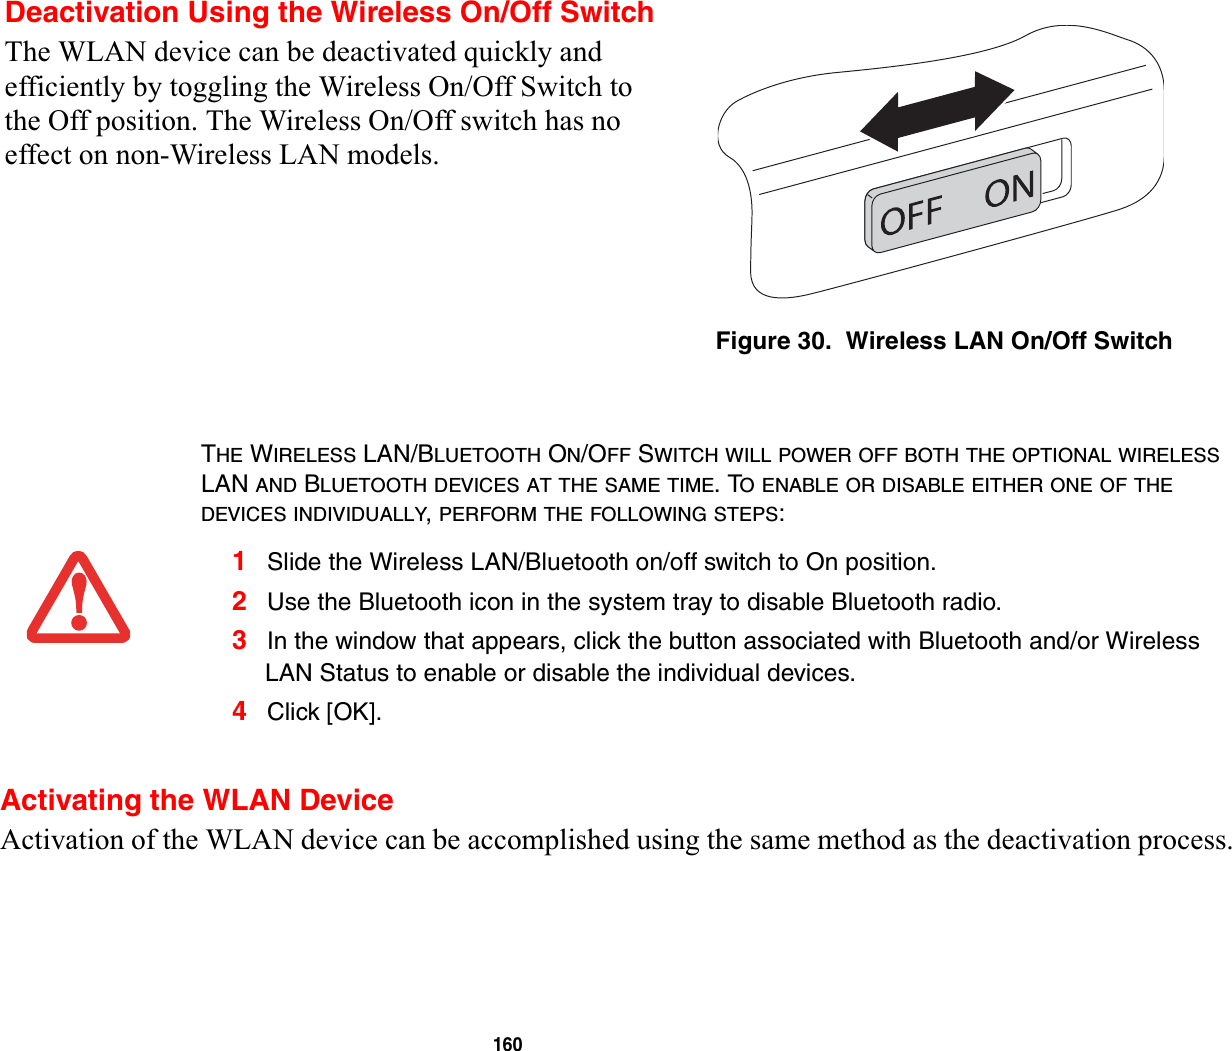 160Activating the WLAN DeviceActivation of the WLAN device can be accomplished using the same method as the deactivation process.Deactivation Using the Wireless On/Off SwitchThe WLAN device can be deactivated quickly and efficiently by toggling the Wireless On/Off Switch to the Off position. The Wireless On/Off switch has no effect on non-Wireless LAN models.Figure 30.  Wireless LAN On/Off SwitchTHE WIRELESS LAN/BLUETOOTH ON/OFF SWITCH WILL POWER OFF BOTH THE OPTIONAL WIRELESSLAN AND BLUETOOTH DEVICES AT THE SAME TIME. TO ENABLE OR DISABLE EITHER ONE OF THEDEVICES INDIVIDUALLY,PERFORM THE FOLLOWING STEPS:1Slide the Wireless LAN/Bluetooth on/off switch to On position.2Use the Bluetooth icon in the system tray to disable Bluetooth radio.3In the window that appears, click the button associated with Bluetooth and/or Wireless LAN Status to enable or disable the individual devices.4Click [OK].